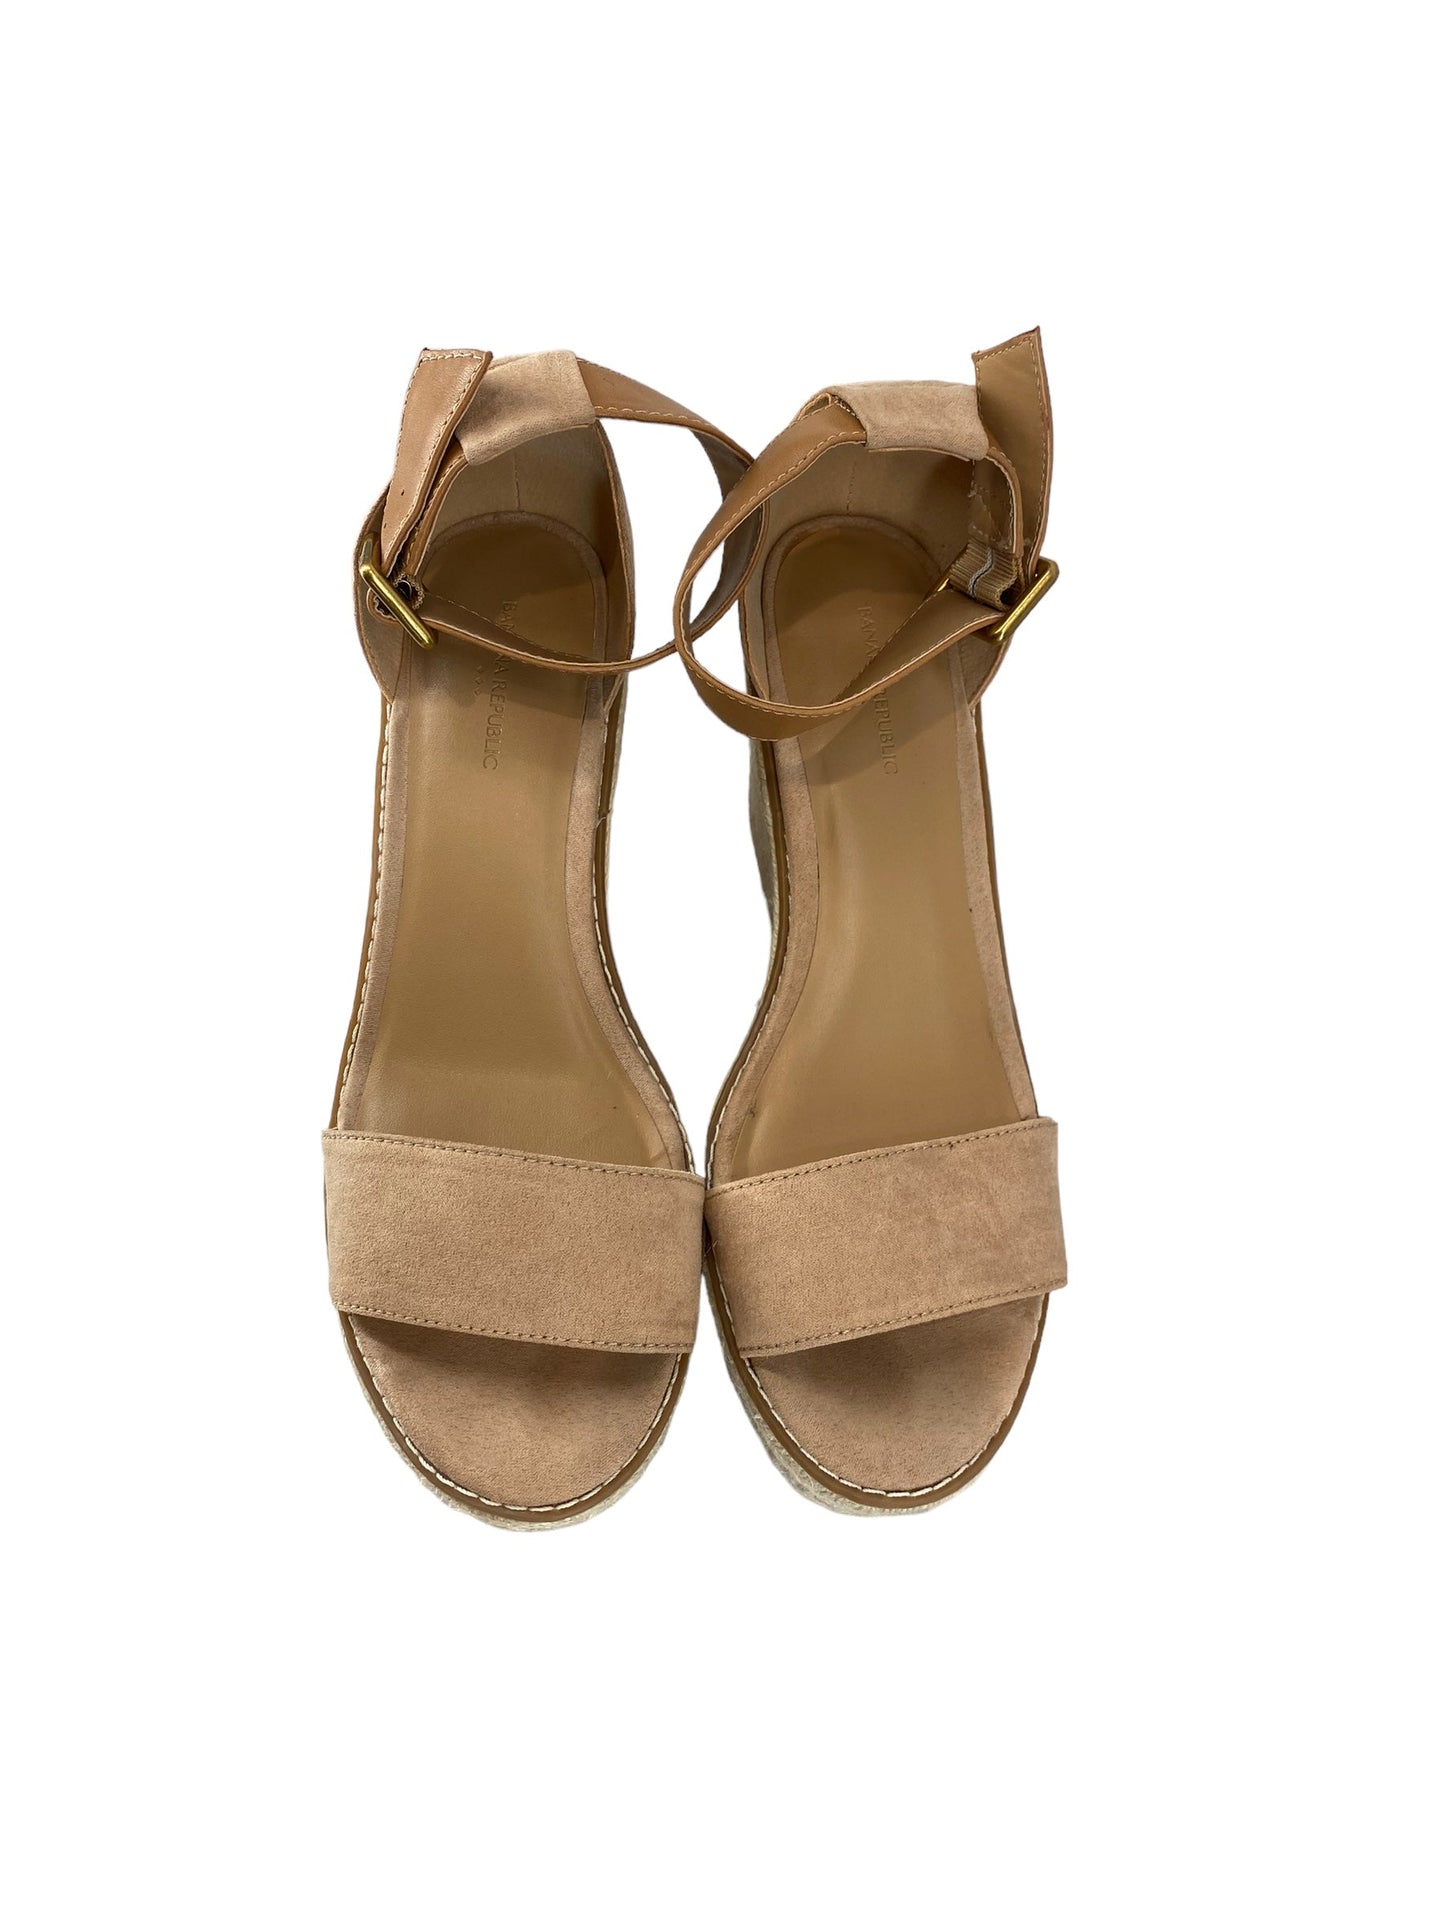 Sandals Heels Wedge By Banana Republic  Size: 8.5